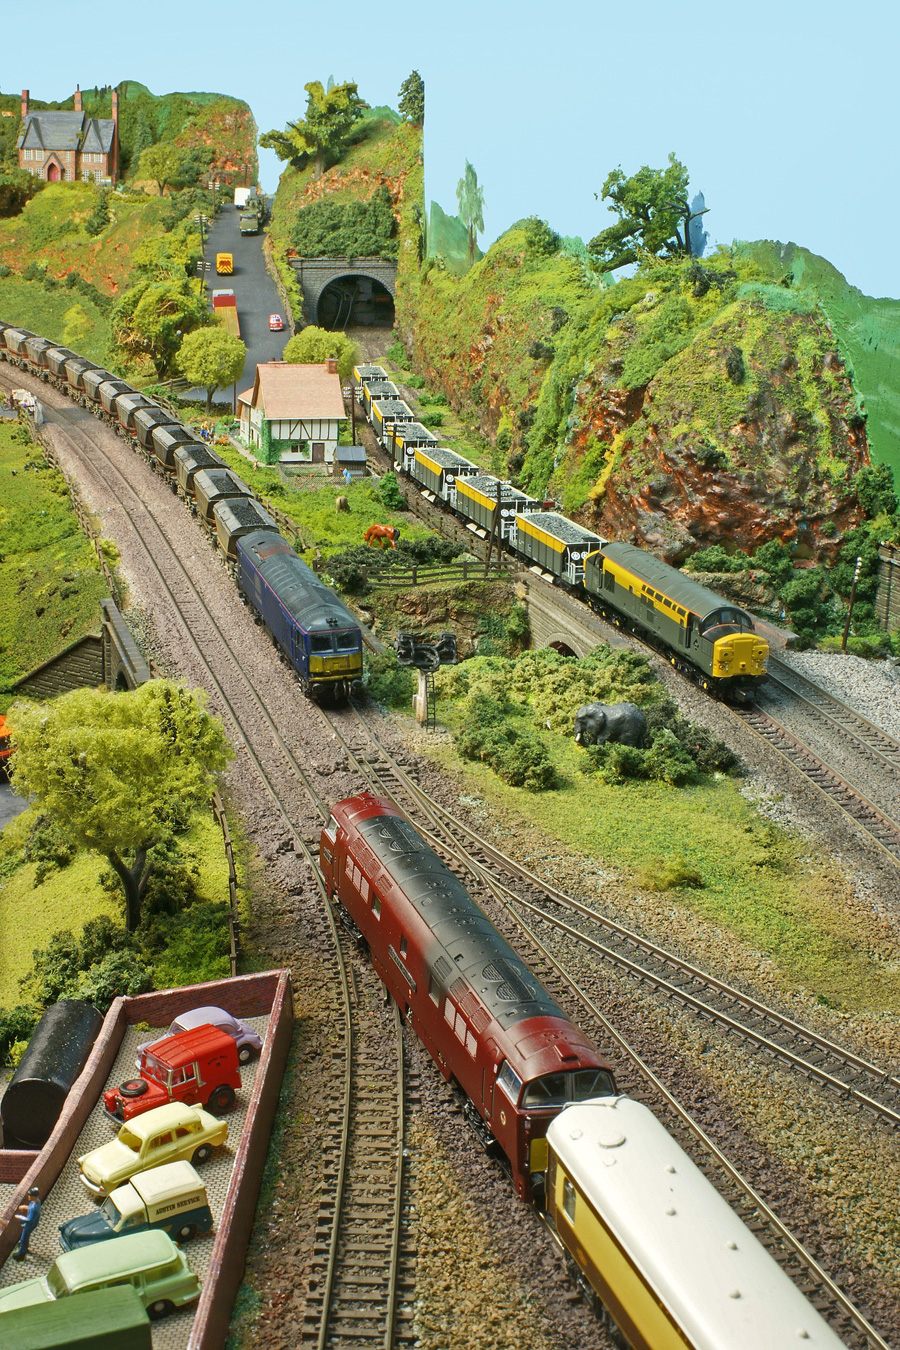 A Class 60 and a Class 37 both bring freight workings towards Bridgebury Gate at the same time, although the Class 37, on the branch line, will have to give way.